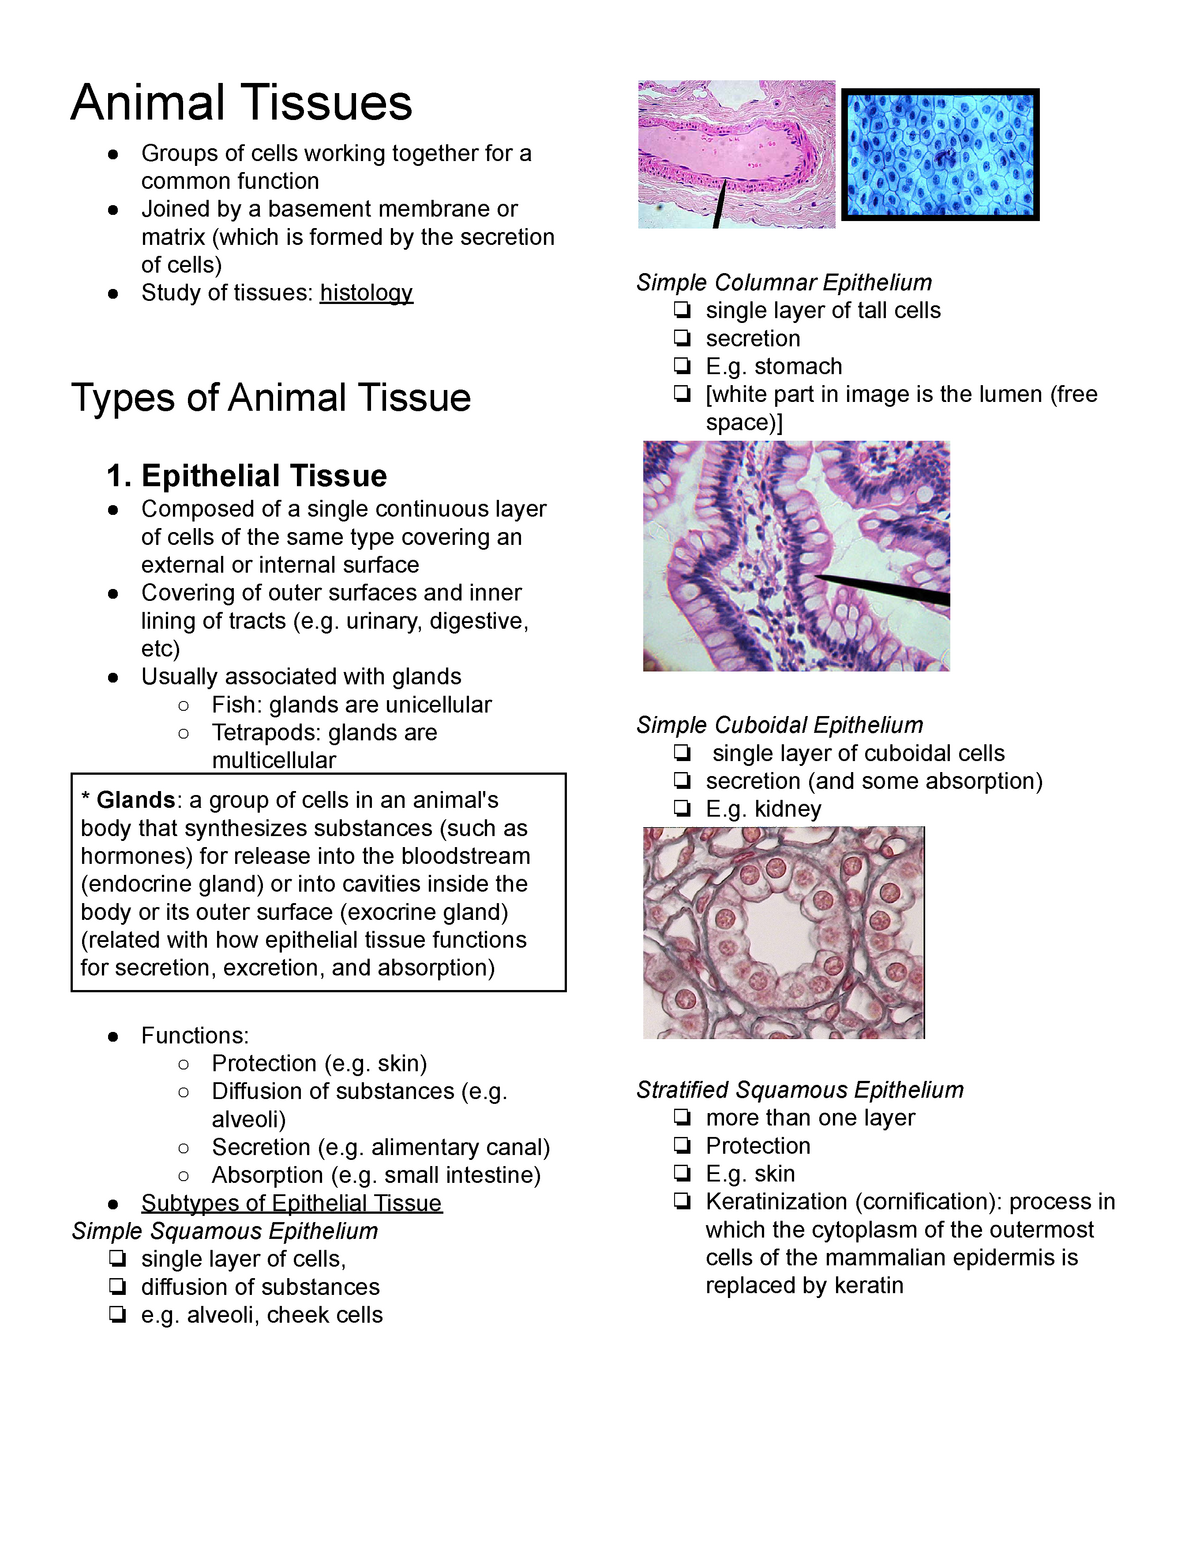 Biology Notes - Animal Tissues - Types, Forms, and Function (Epithelial,  Connective, Muscular, and - Studocu